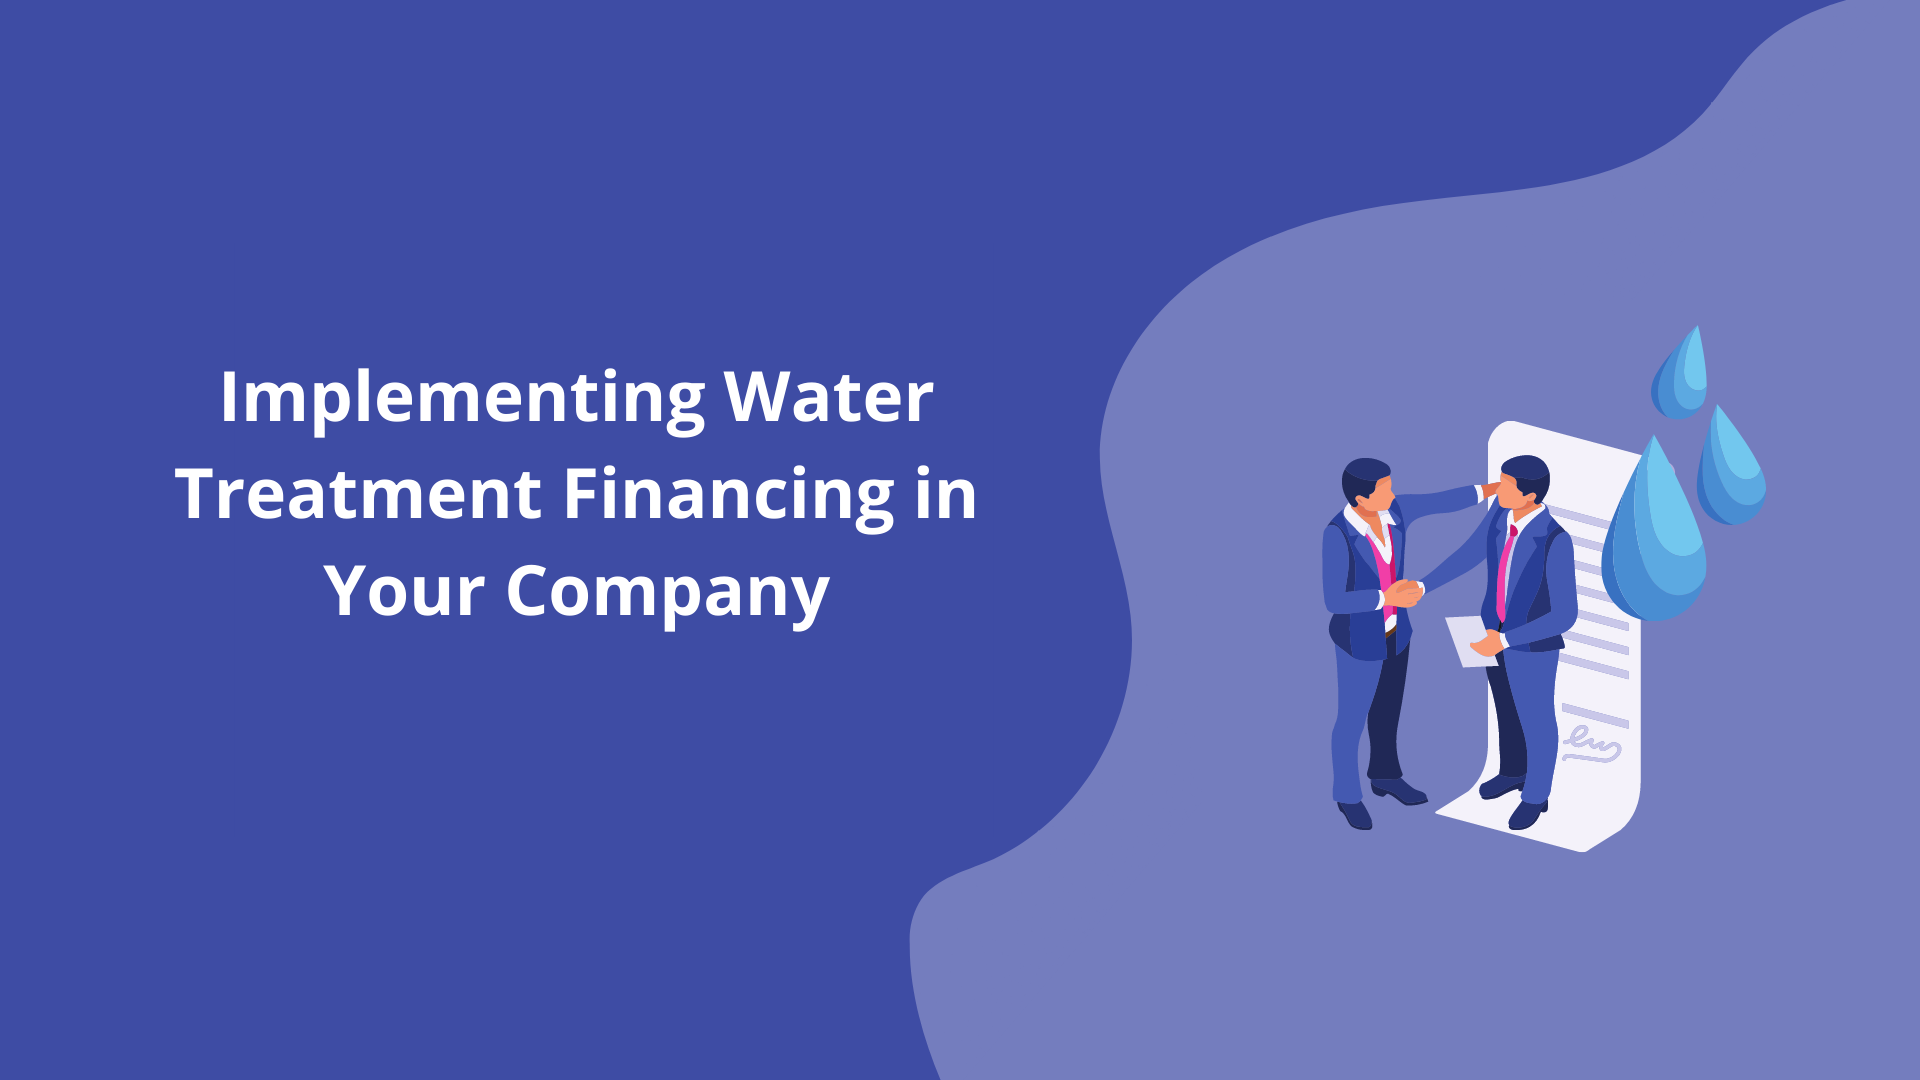 Implementing Water Treatment Financing in Your Company